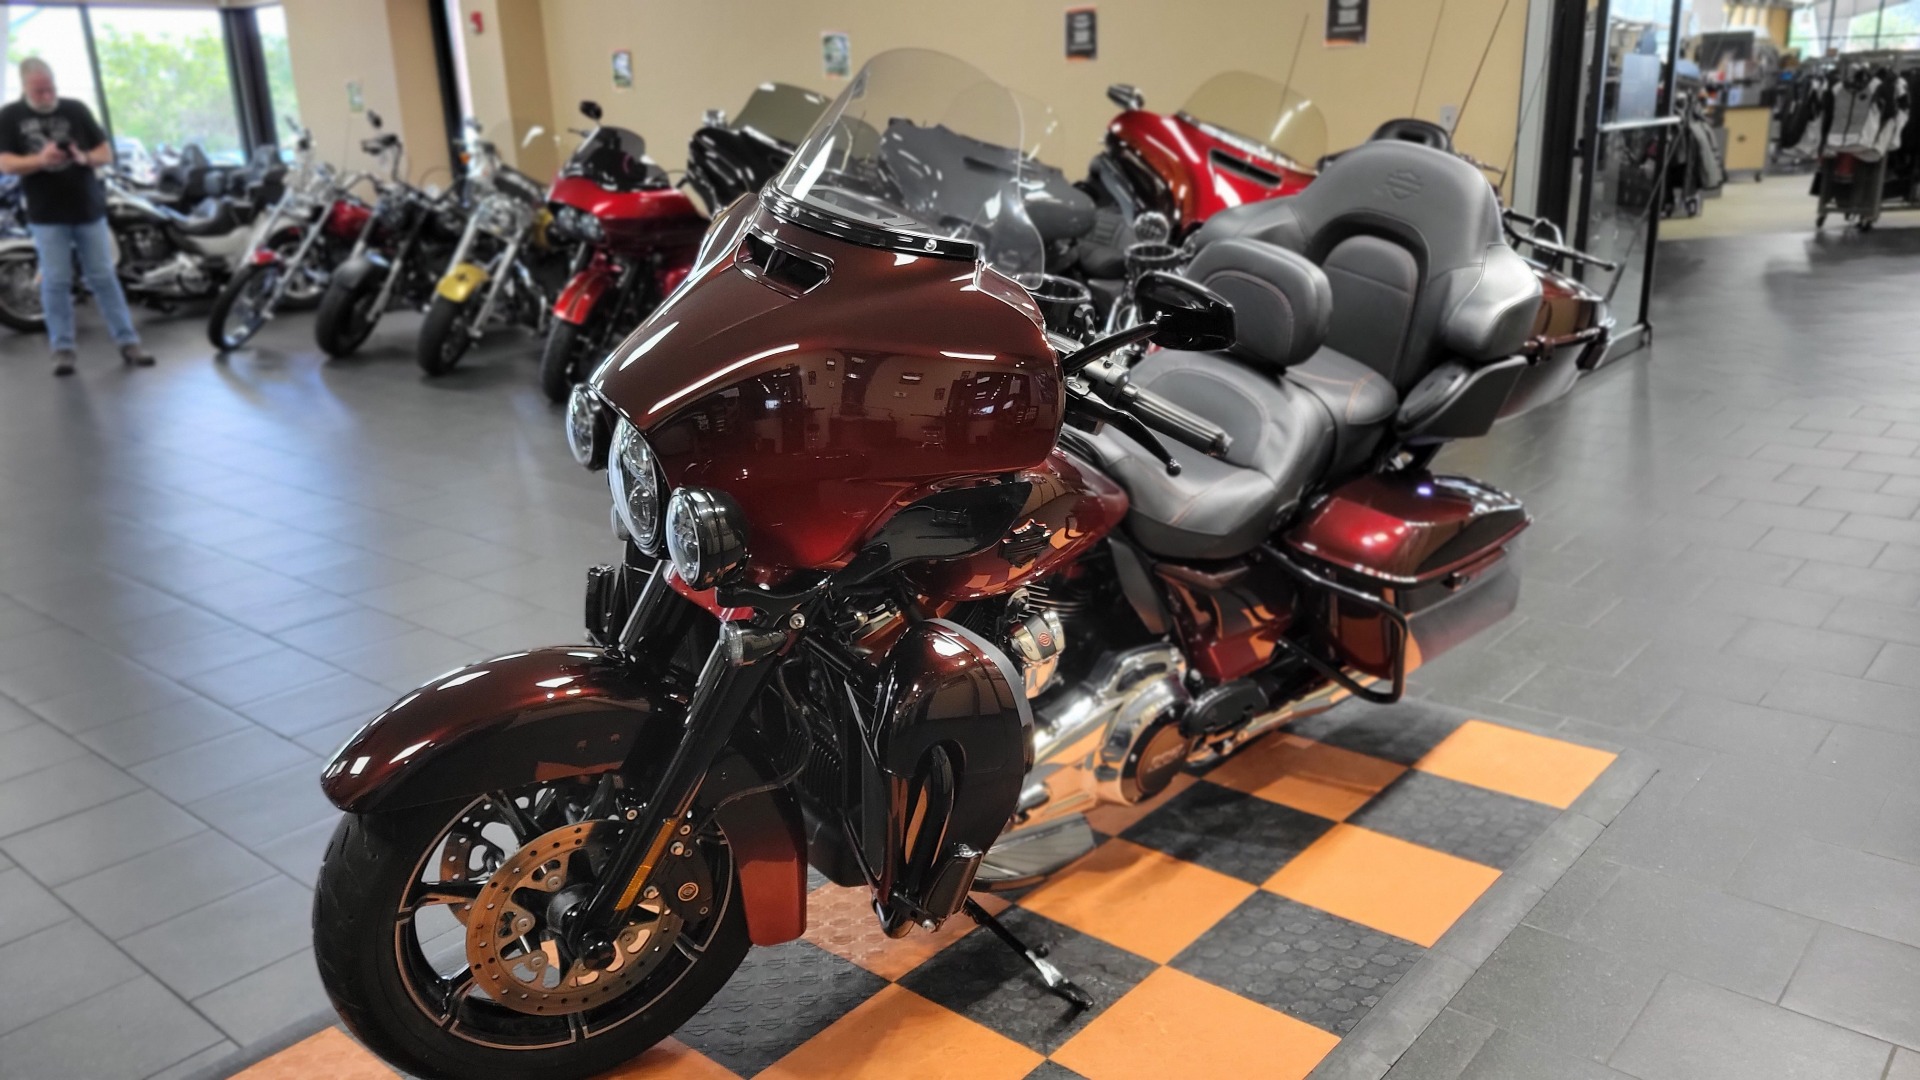 2018 Harley-Davidson CVO™ Limited in The Woodlands, Texas - Photo 3